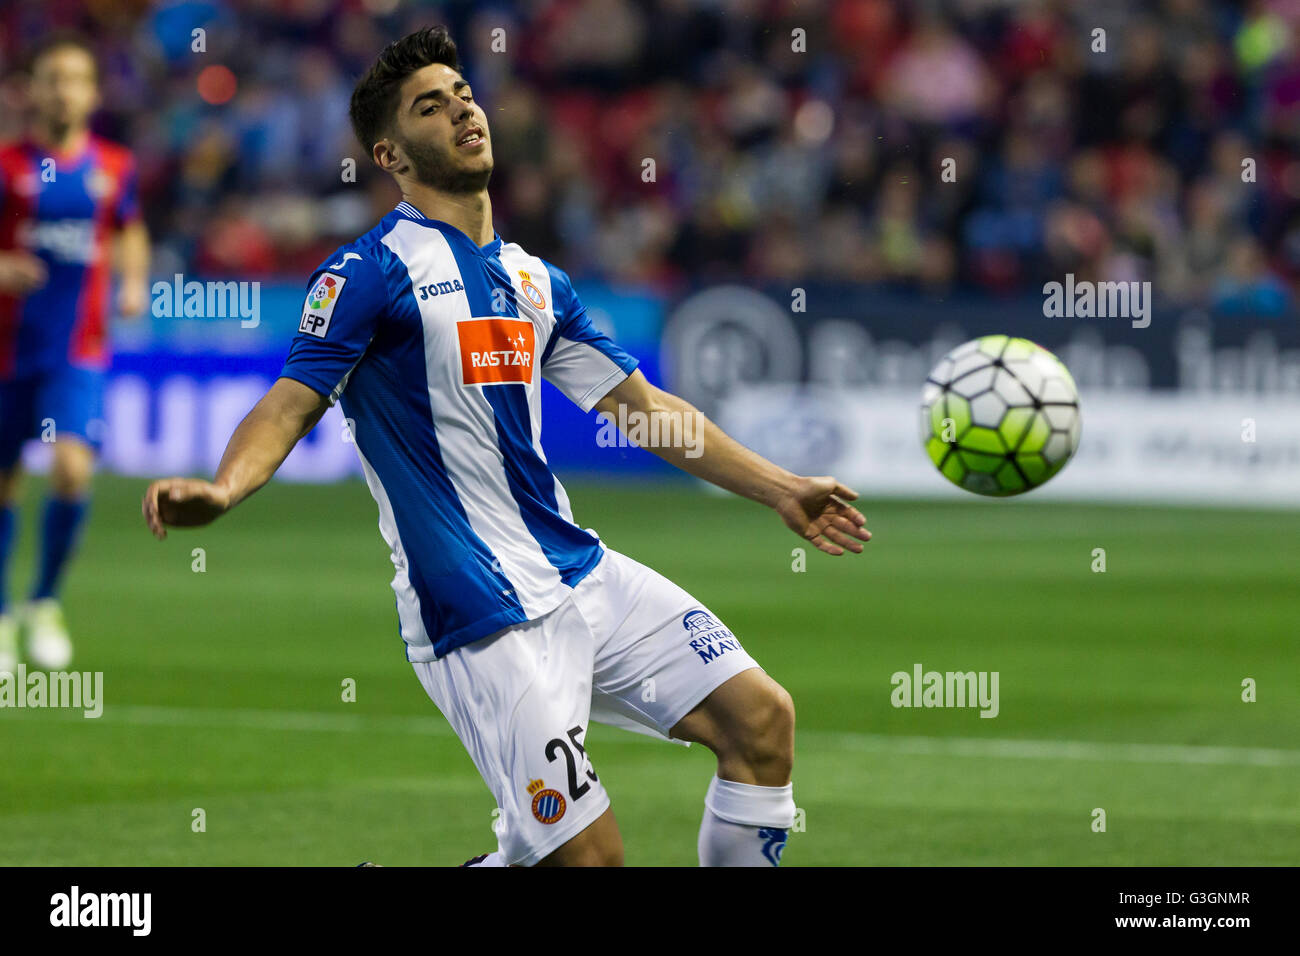 Valencia, Spain. 15th Apr, 2016. M. Asensio during La Liga match between Levante UD and RCD Espanyol at Ciutat de Valencia Stadium. La Liga match between Levante UD vs RCD Espanyol, with a final score 2-1. Rossi and Medjani scored for Levante and Hernan Perez scored for RCD Espanyol. © Jose Miguel Fernandez de Velasco/Pacific Press/Alamy Live News Stock Photo